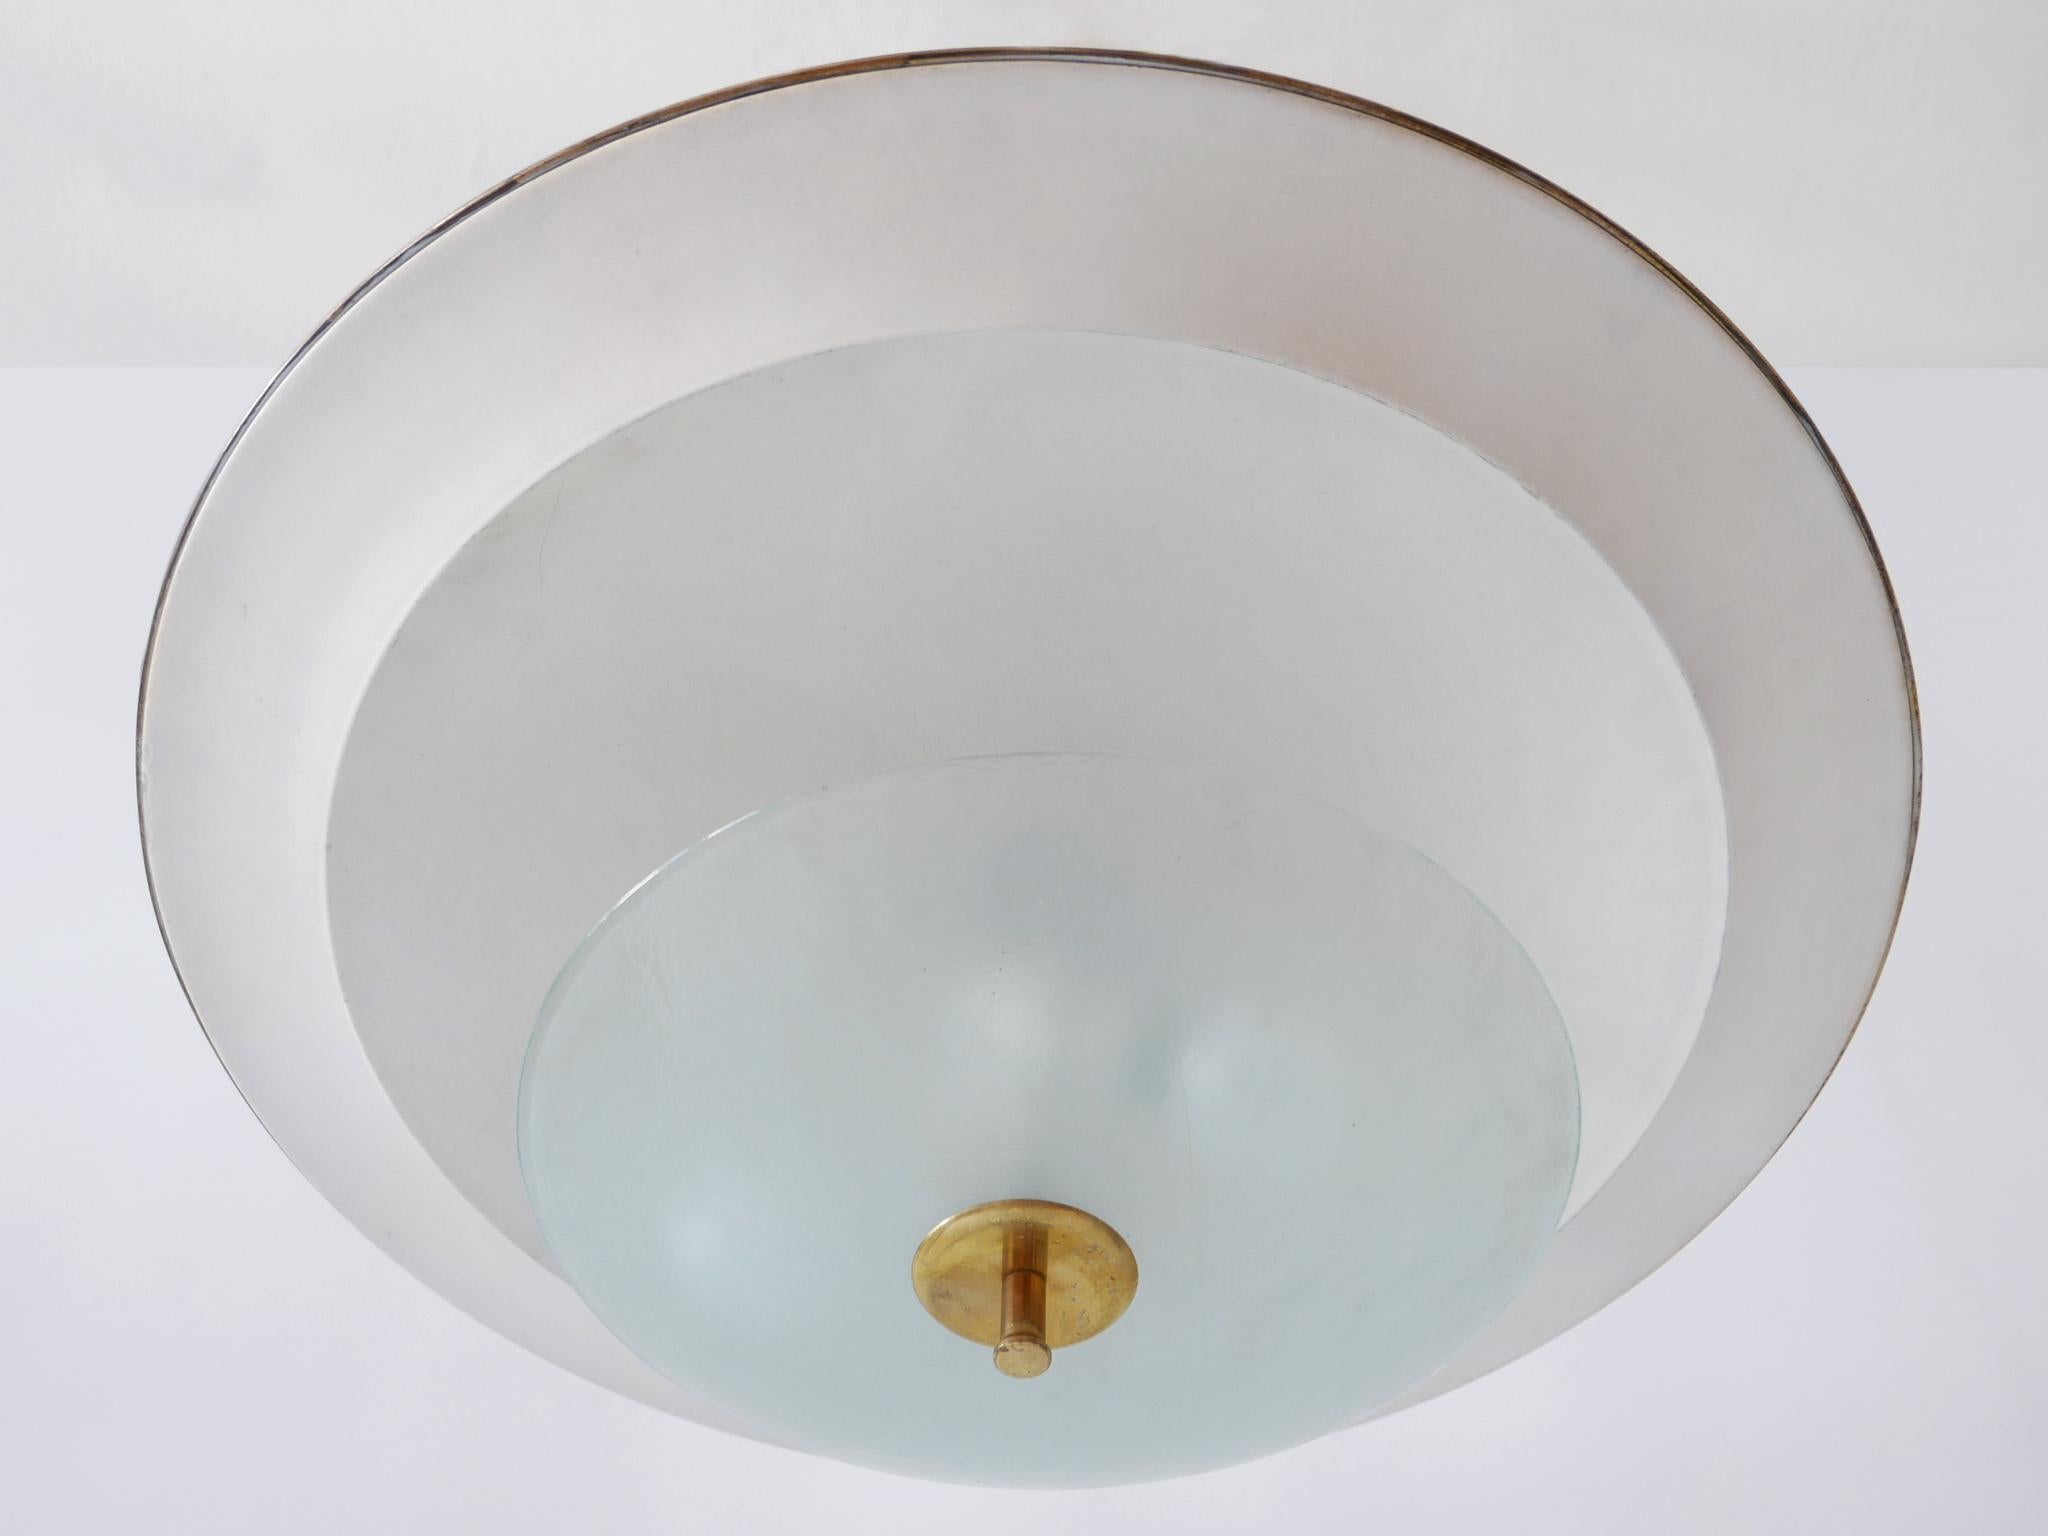 Large Mid-Century Modern 'Ufo' Ceiling Light or Pendant Lamp Germany 1950s № 3 For Sale 11